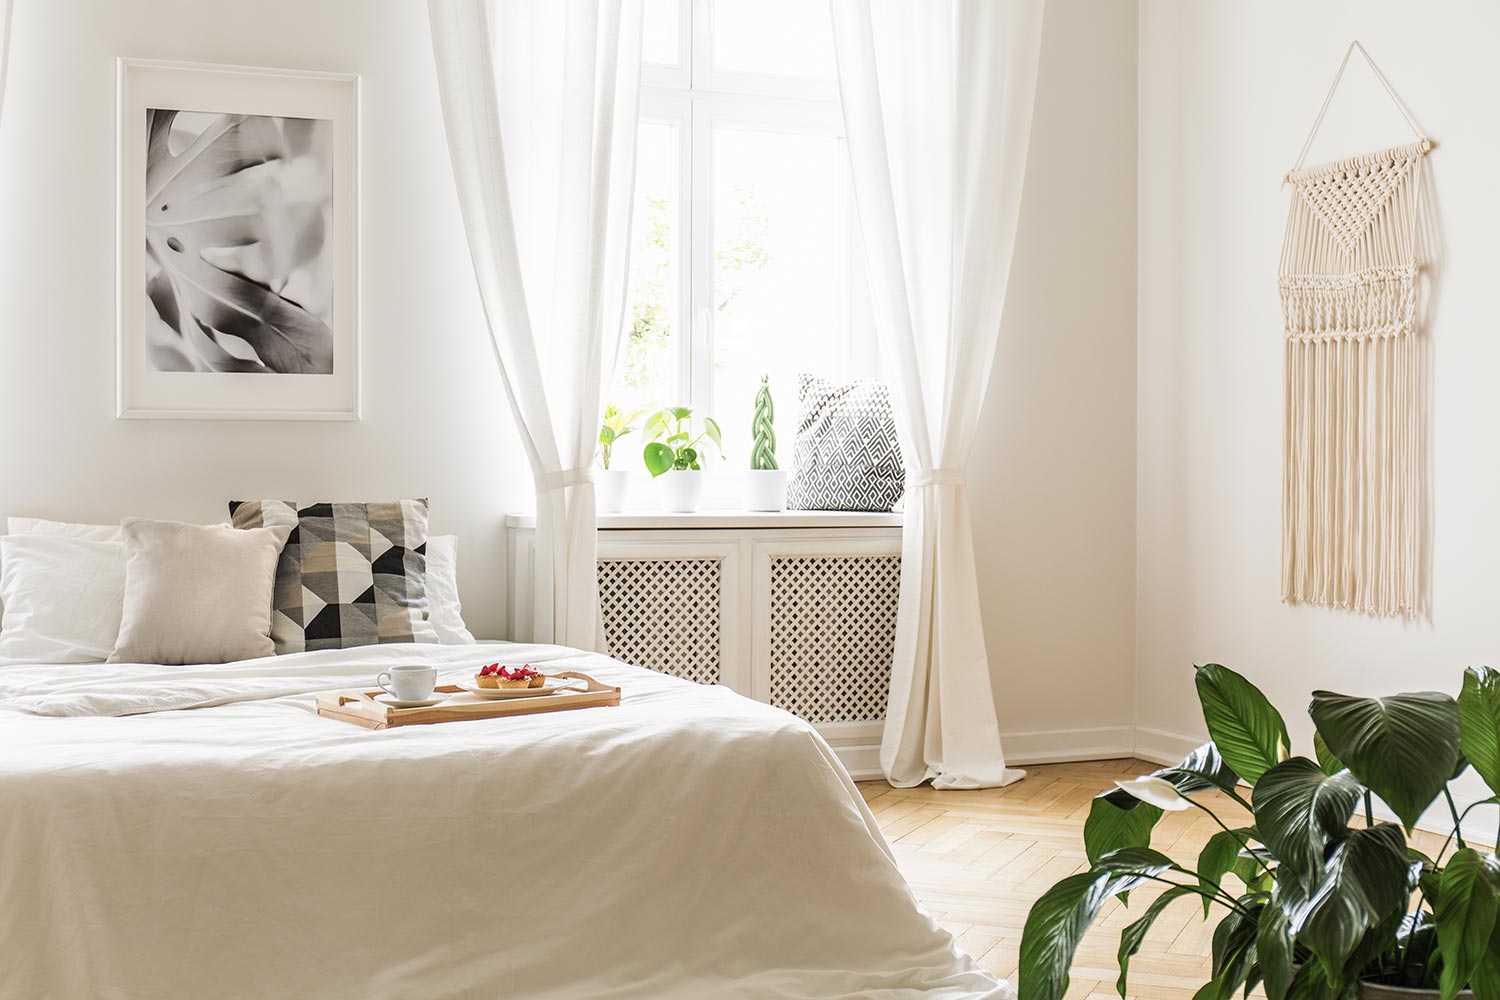 Breakfast tray with pastries and coffee on a cozy, white bed in a bright and peaceful bedroom interior with plants on a window sill seat